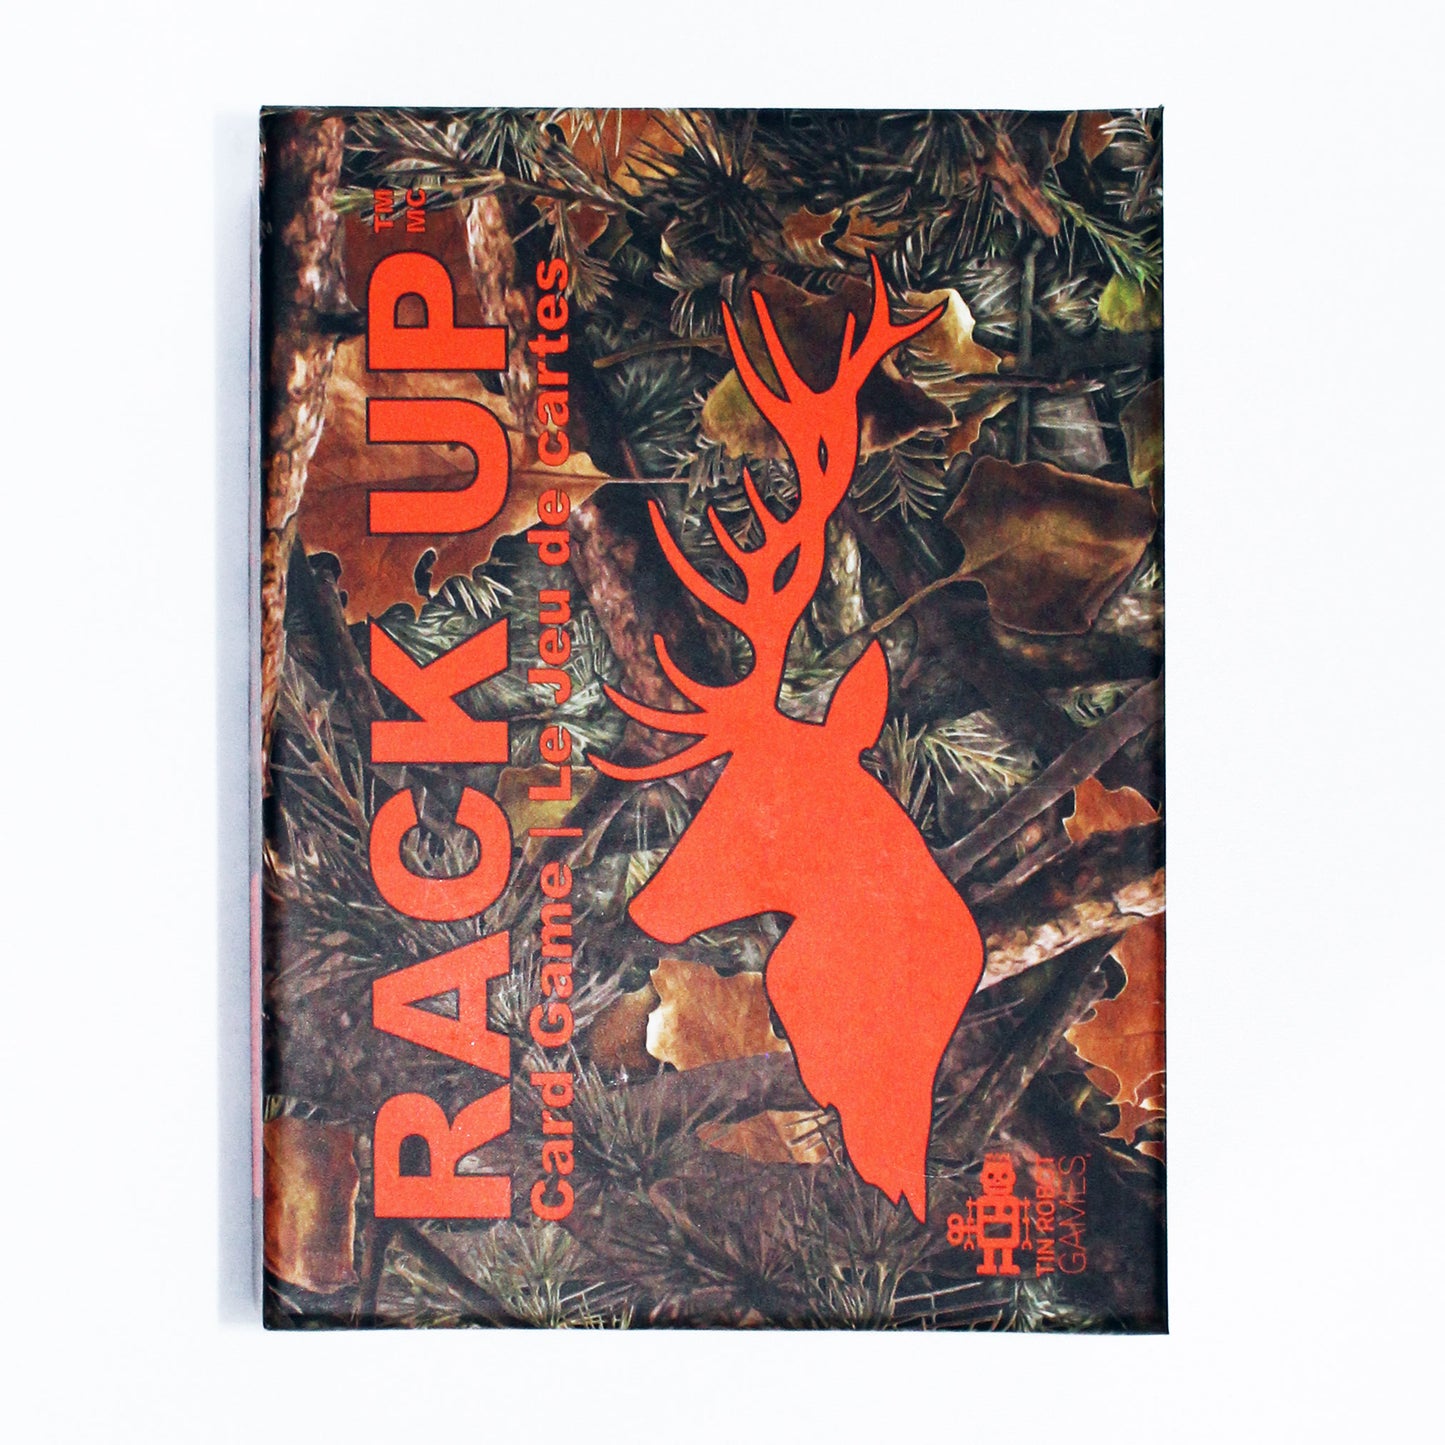 Rack UP: The Hunting Card Game